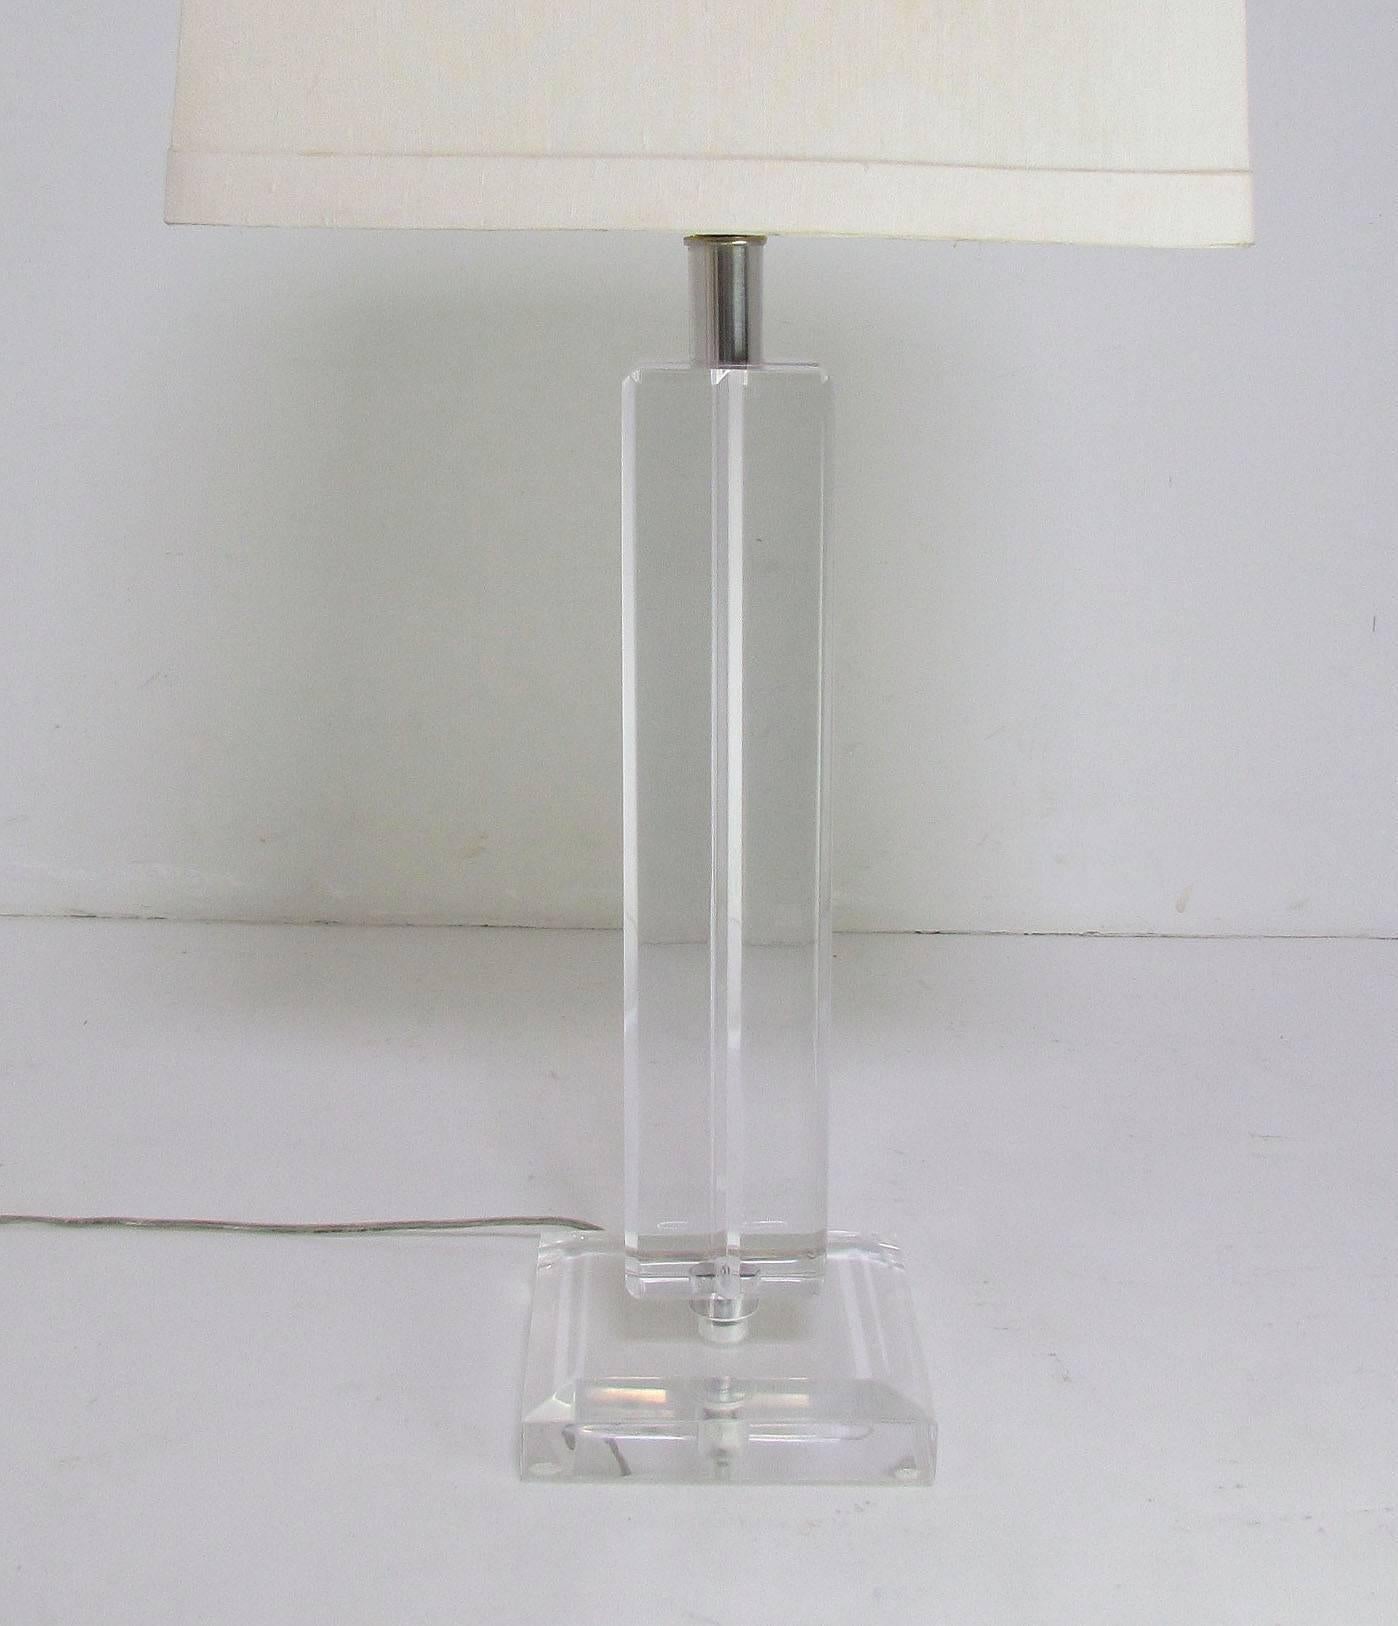 Pair of columnar table lamps in Lucite by the Ritts Astrolite Company, with original Lucite finials and chromed accents. One retains the original Ritts Co. label.

Without shades, these measure 34.5